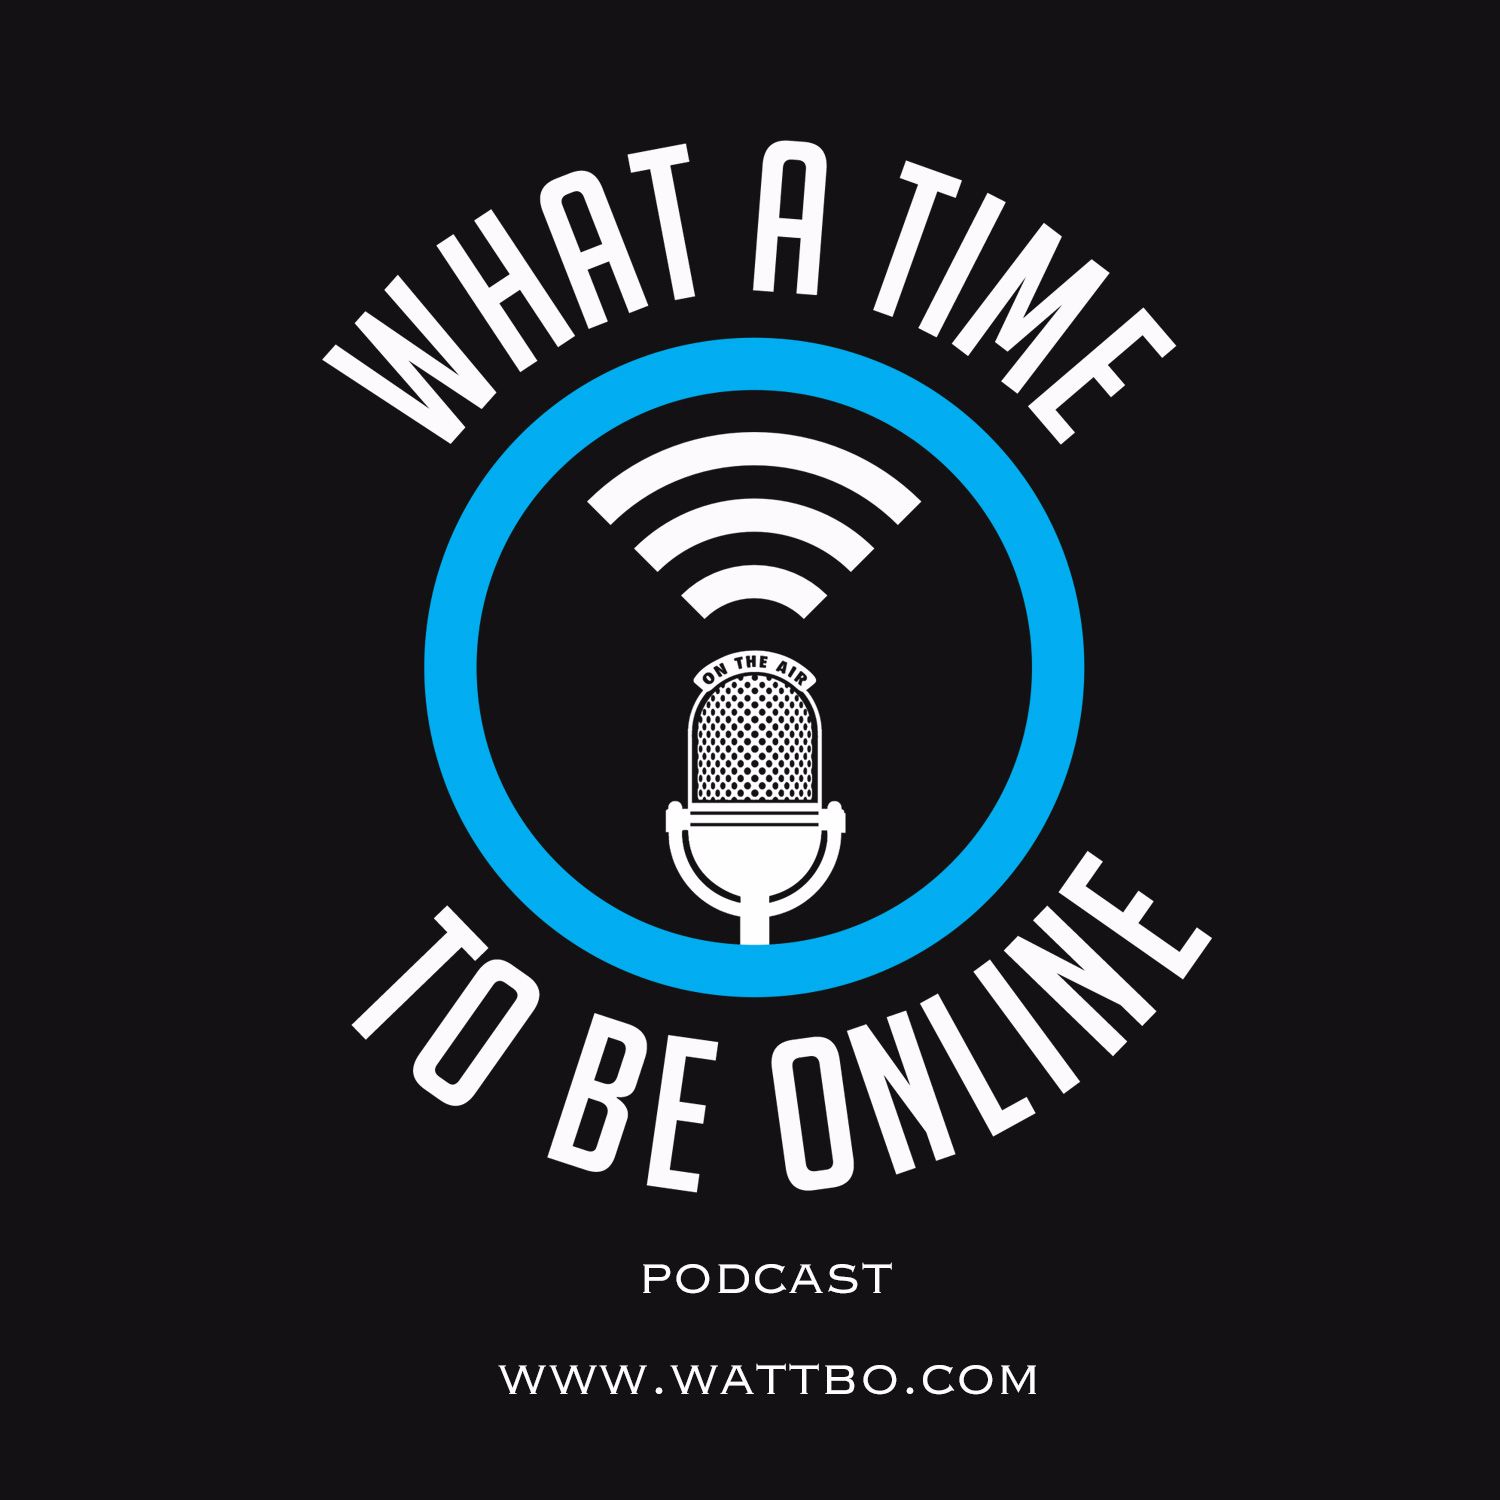 Wattbo: What A Time To Be Online Podcast